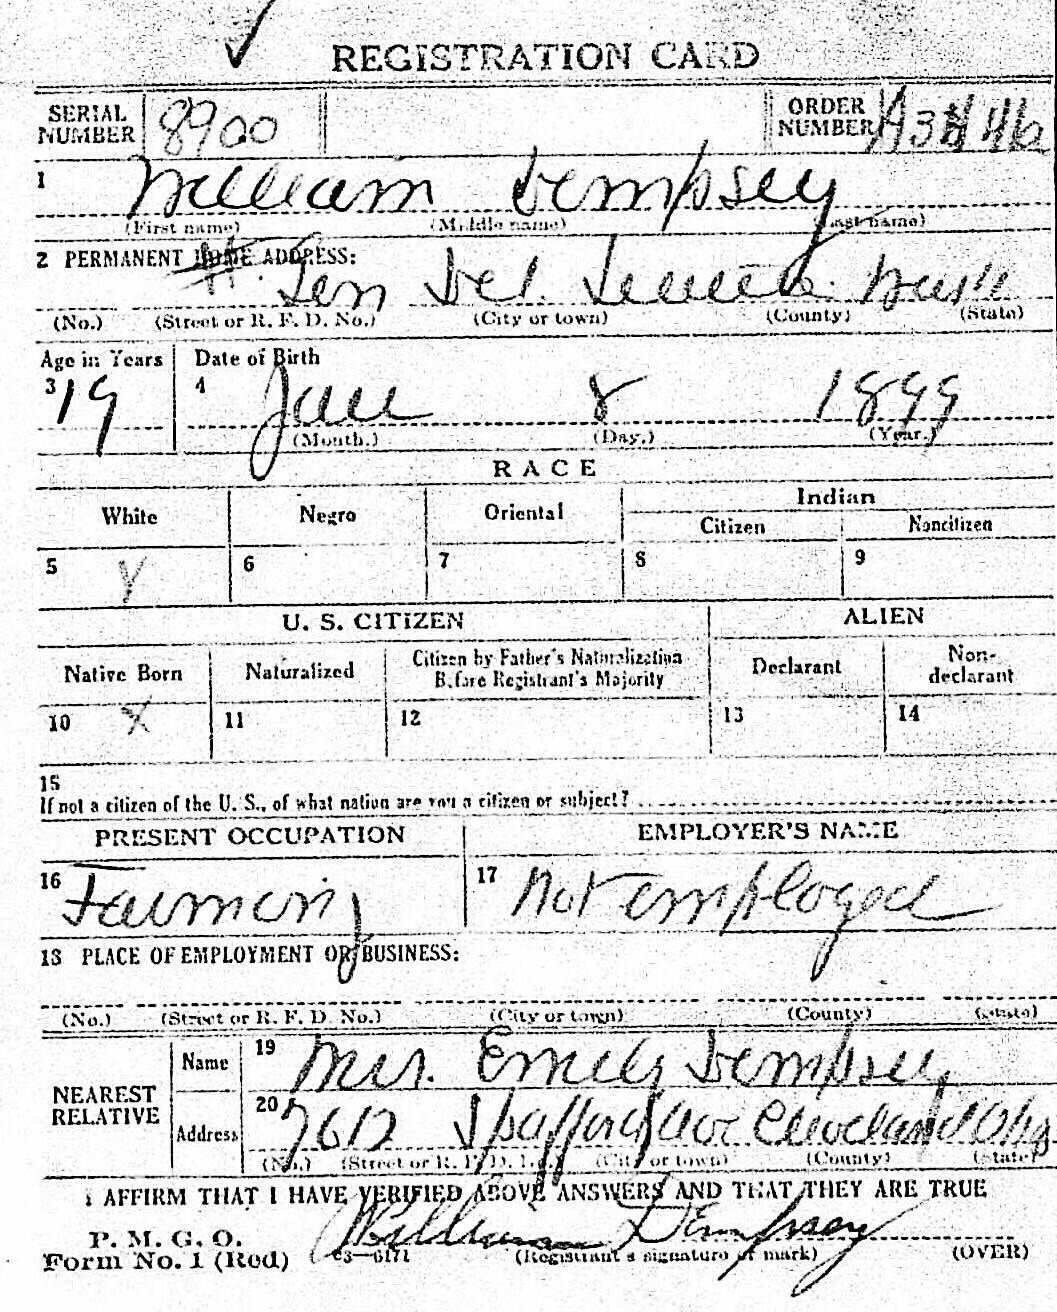 This portion of William Dempsey’s undated draft registration card, which contains false information, was probably completed in early 1918. (Image provided by ancestry.com website)